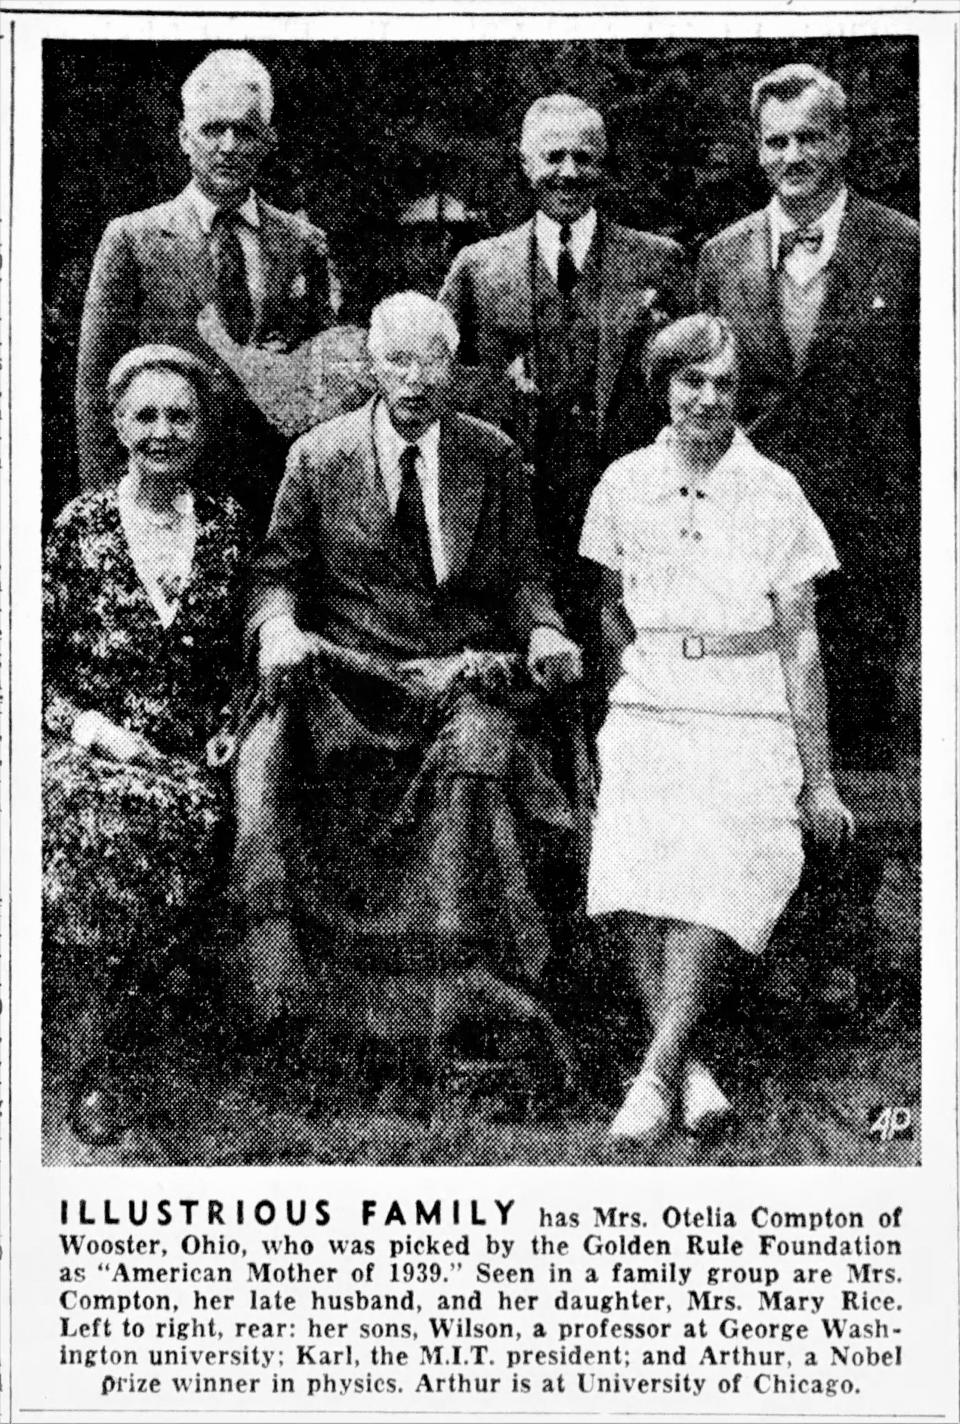 A photo of the full Compton family. (Front left to right) Otelia Compton, Elias Compton and Mary Rice. (Back left to right) Wilson Compton, Karl Compton and Arthur Compton.